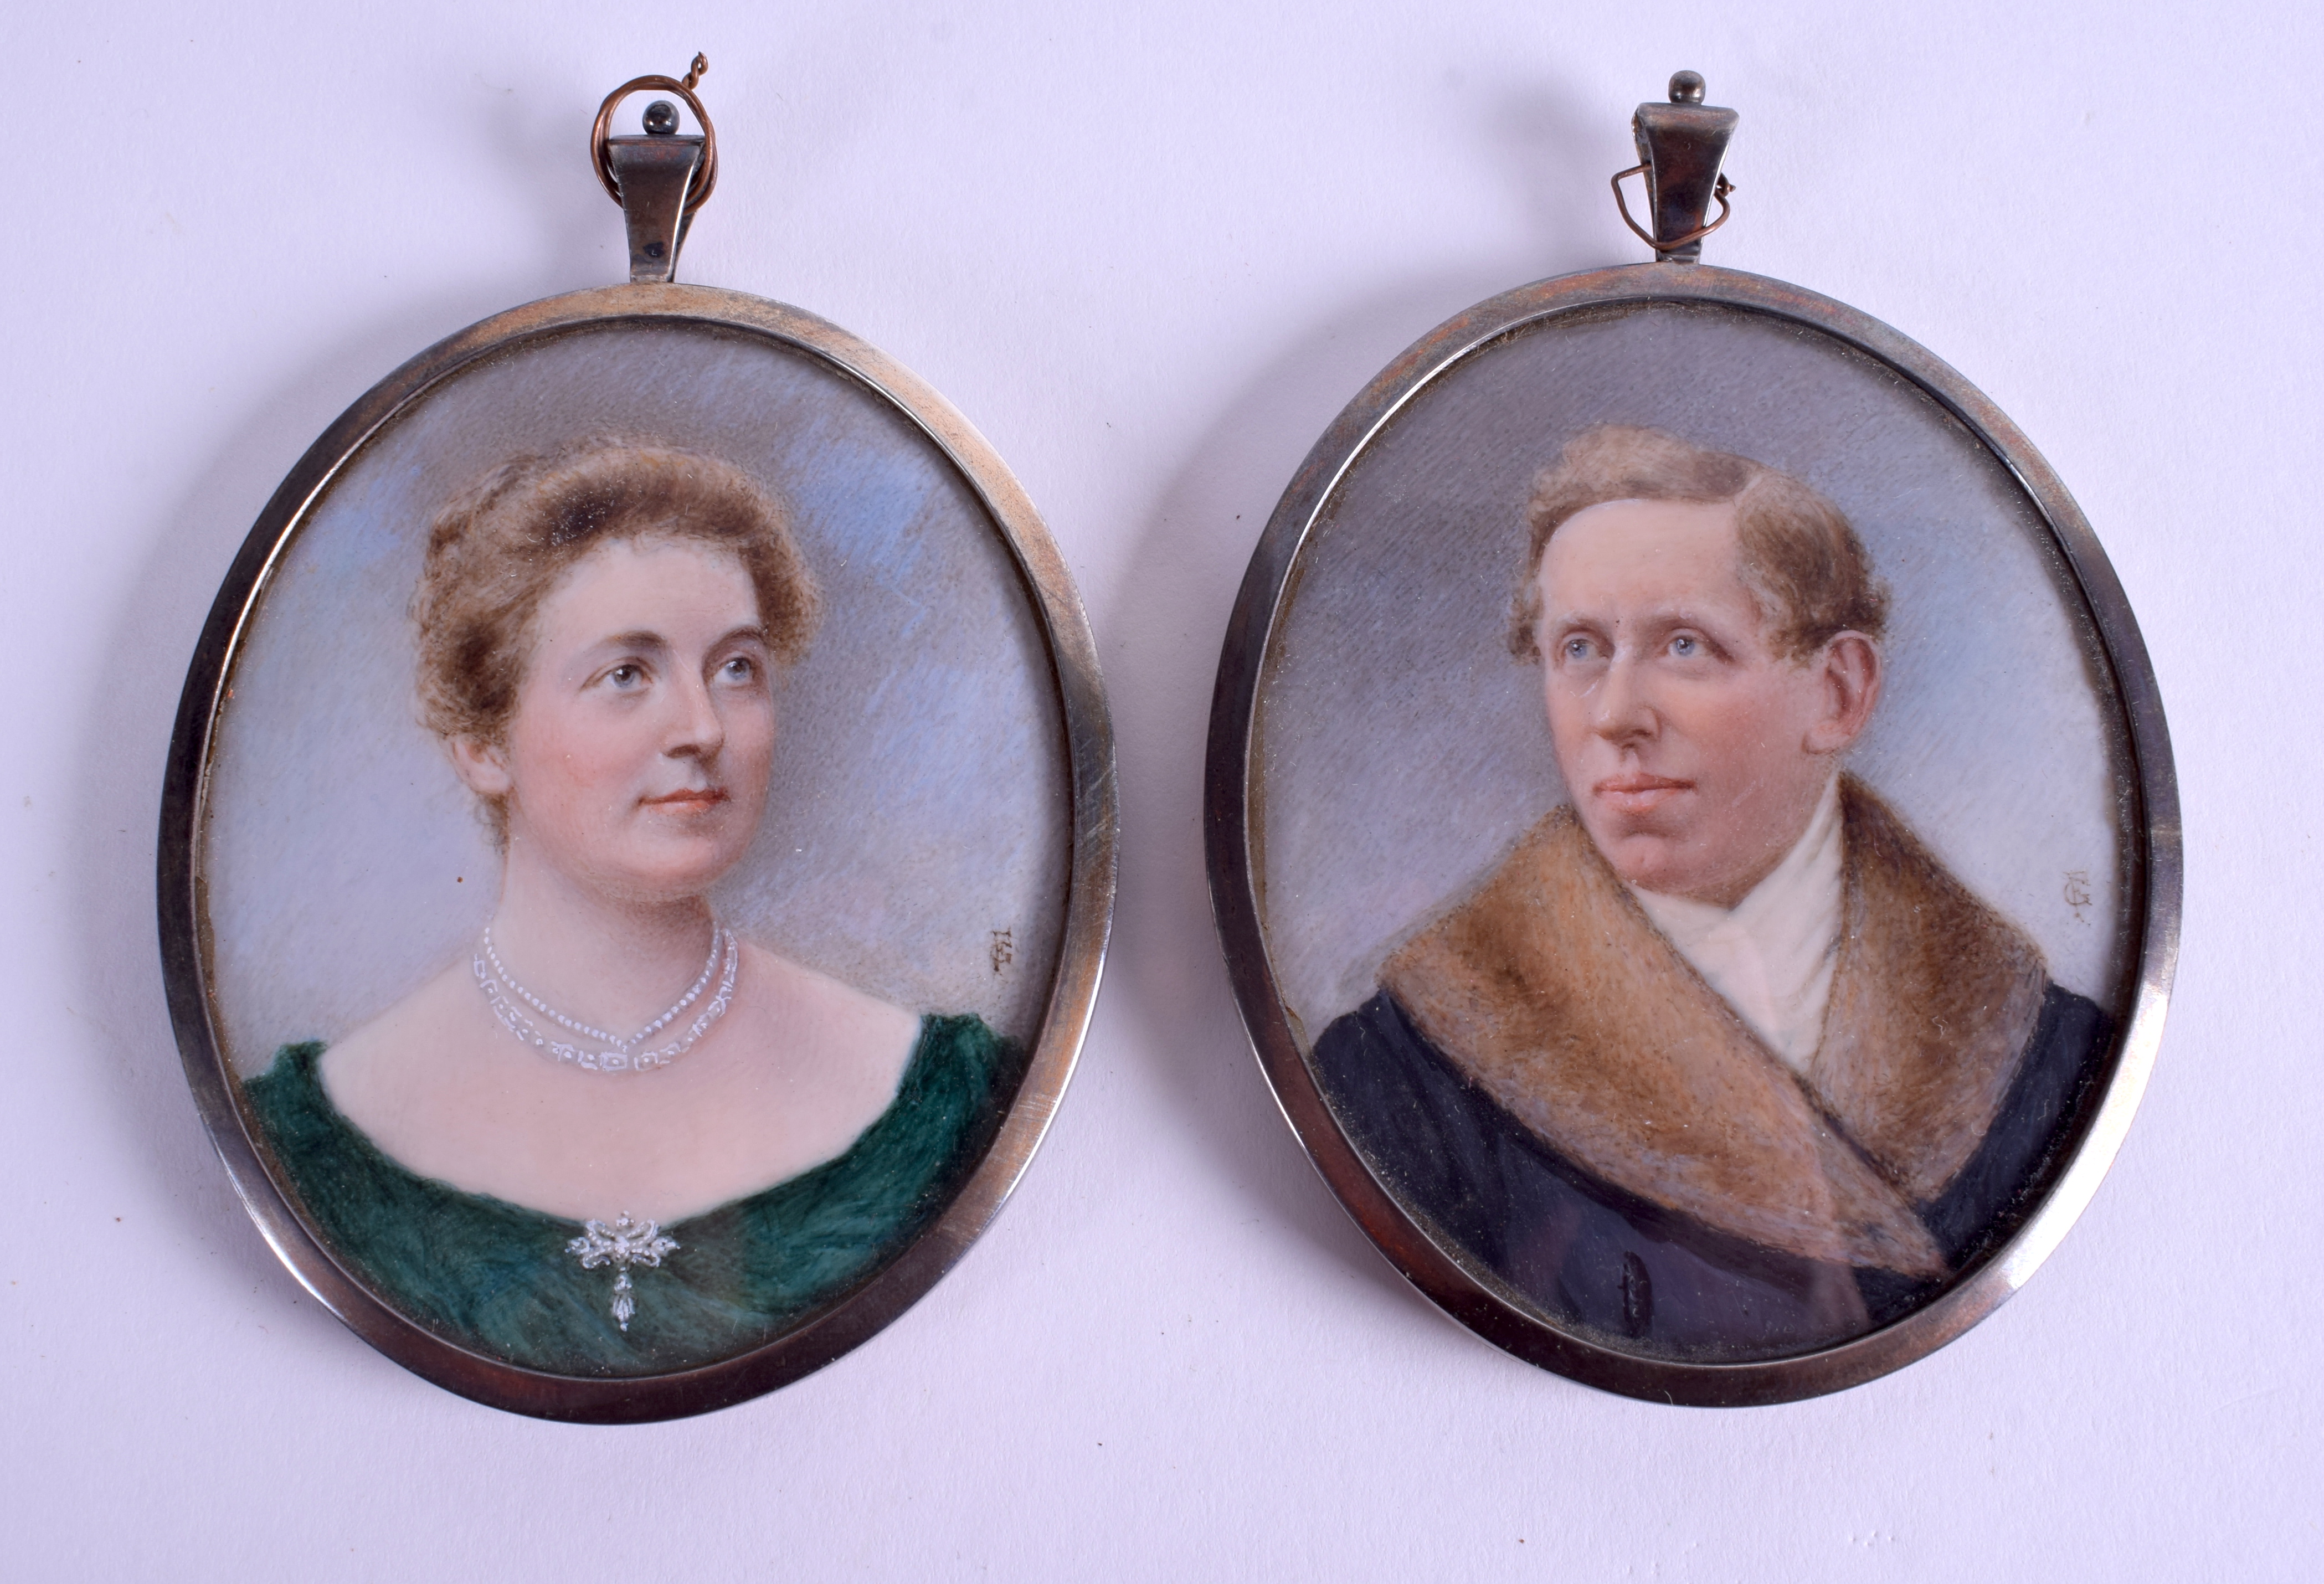 A PAIR OF LATE 19TH CENTURY PAINTED IVORY PORTRAIT MINIATURES within silver frames. 6.5 cm x 7.5 cm